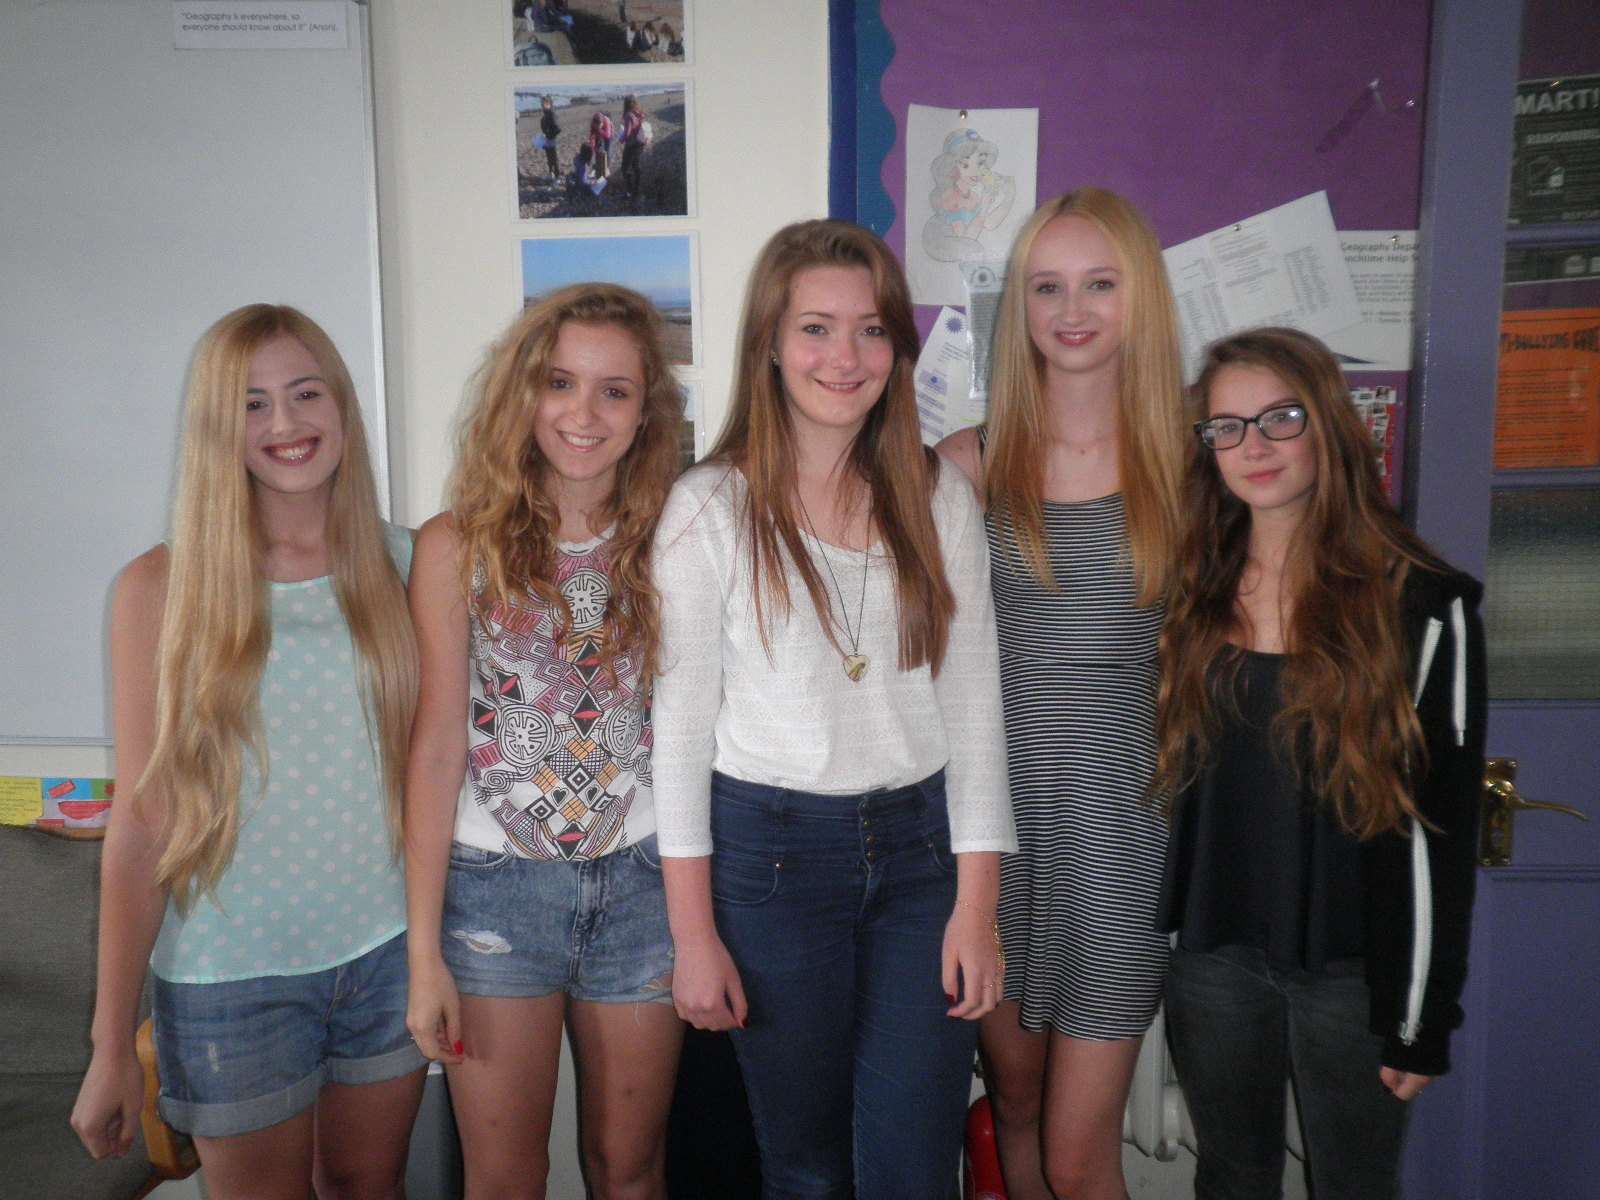 Rosie Hook, Molly Cordery, Lucy Wright, Emily Williams and Lena Blacker.